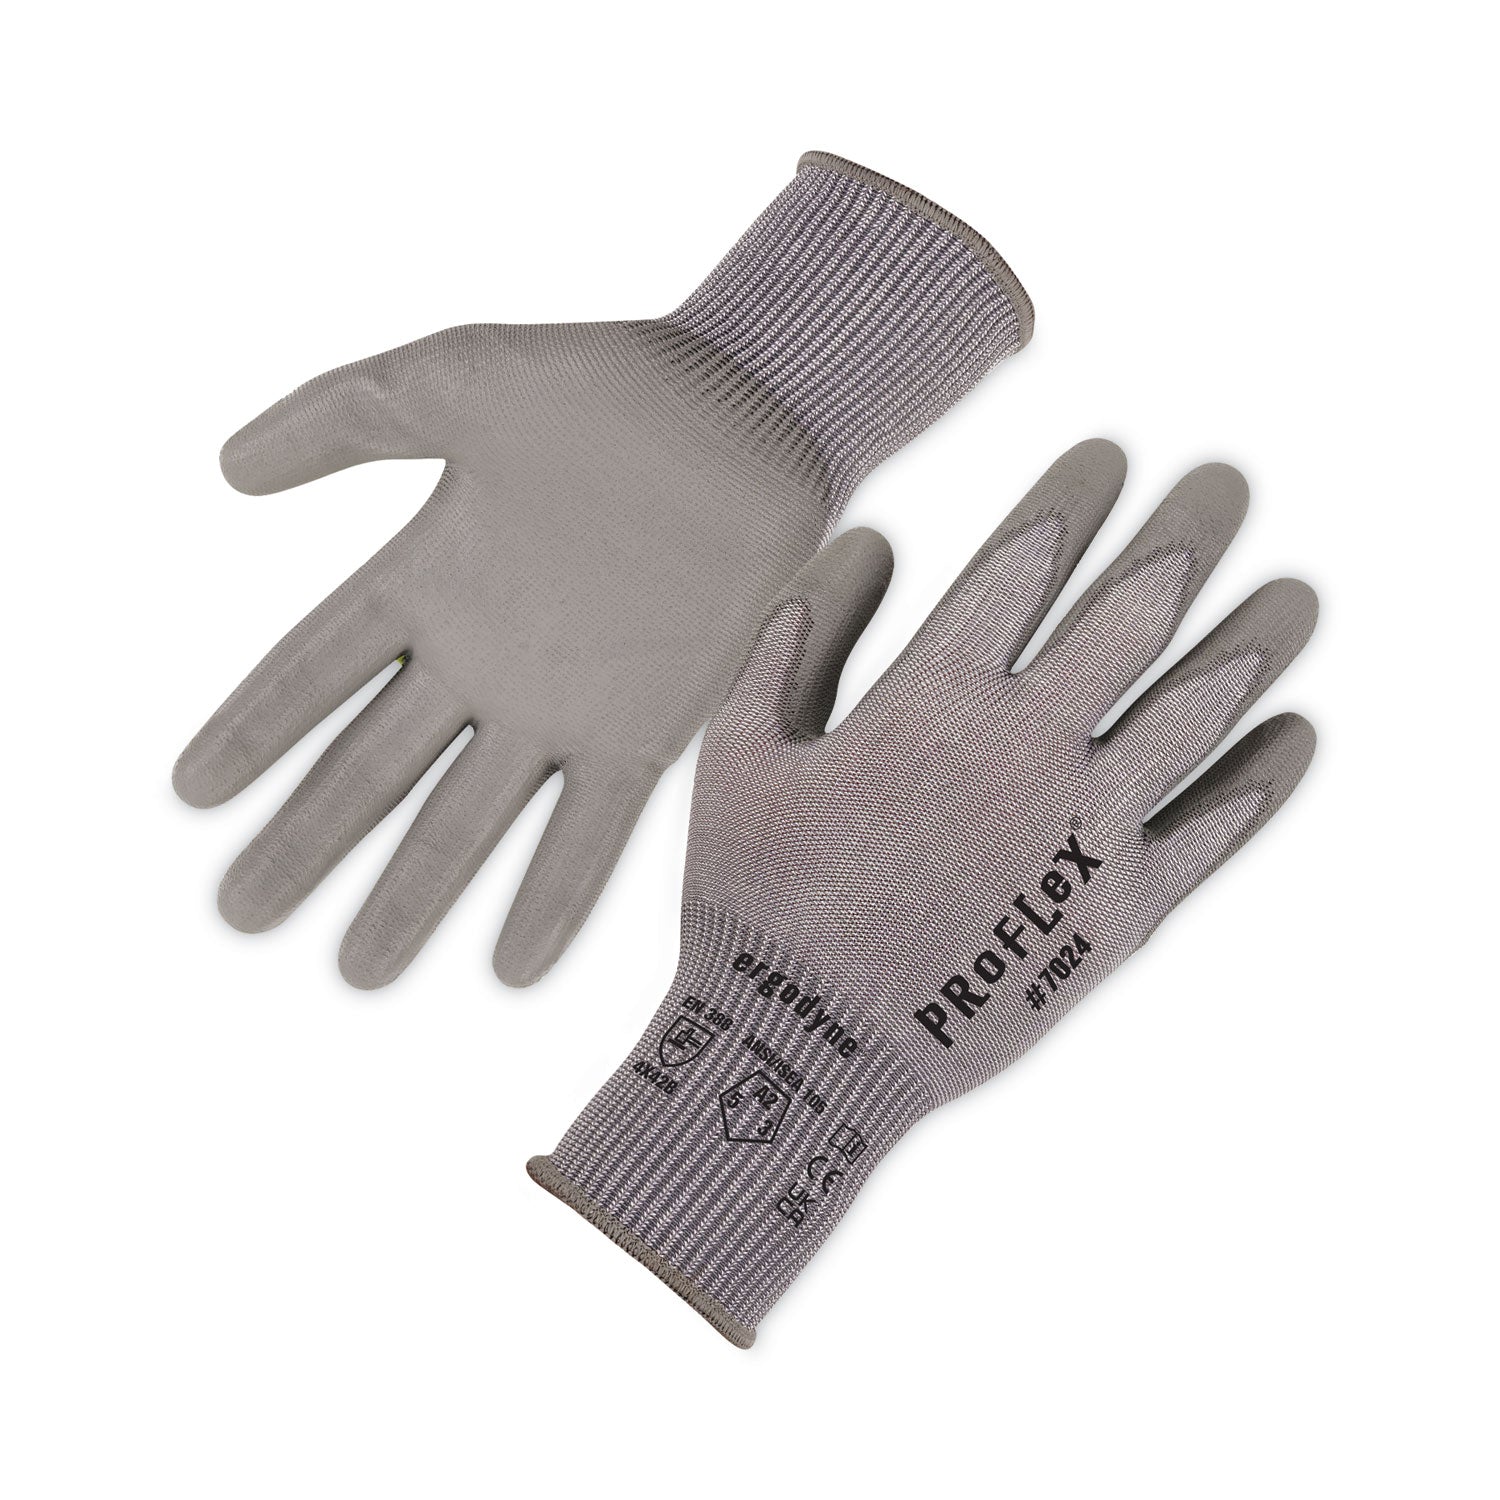 proflex-7024-ansi-a2-pu-coated-cr-gloves-gray-x-large-pair-ships-in-1-3-business-days_ego10405 - 1